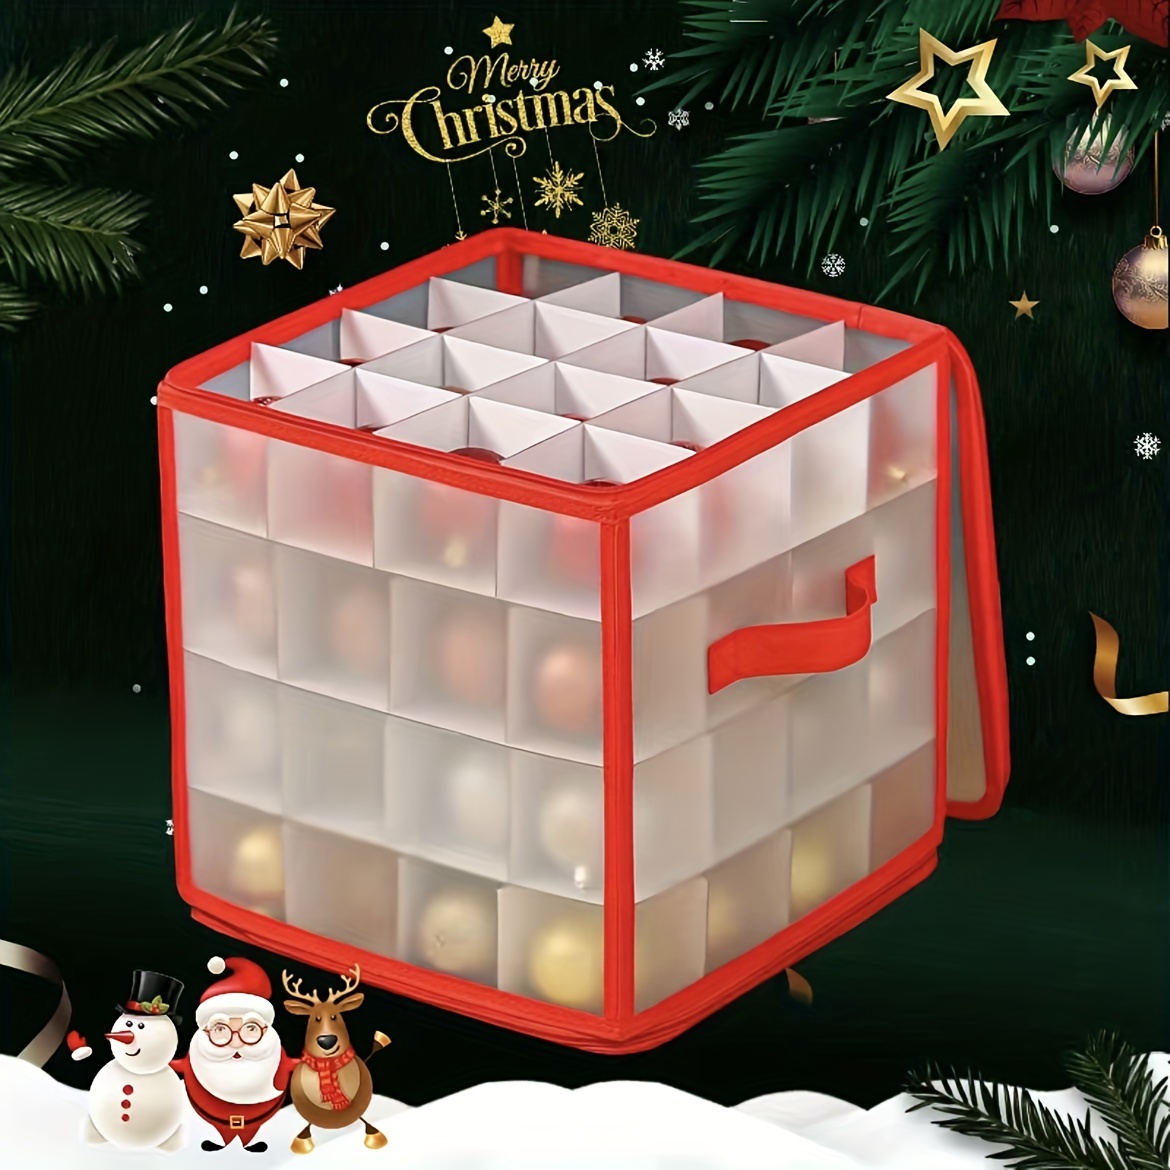 Christmas Ornament Storage Box Container Fits up to 128 with